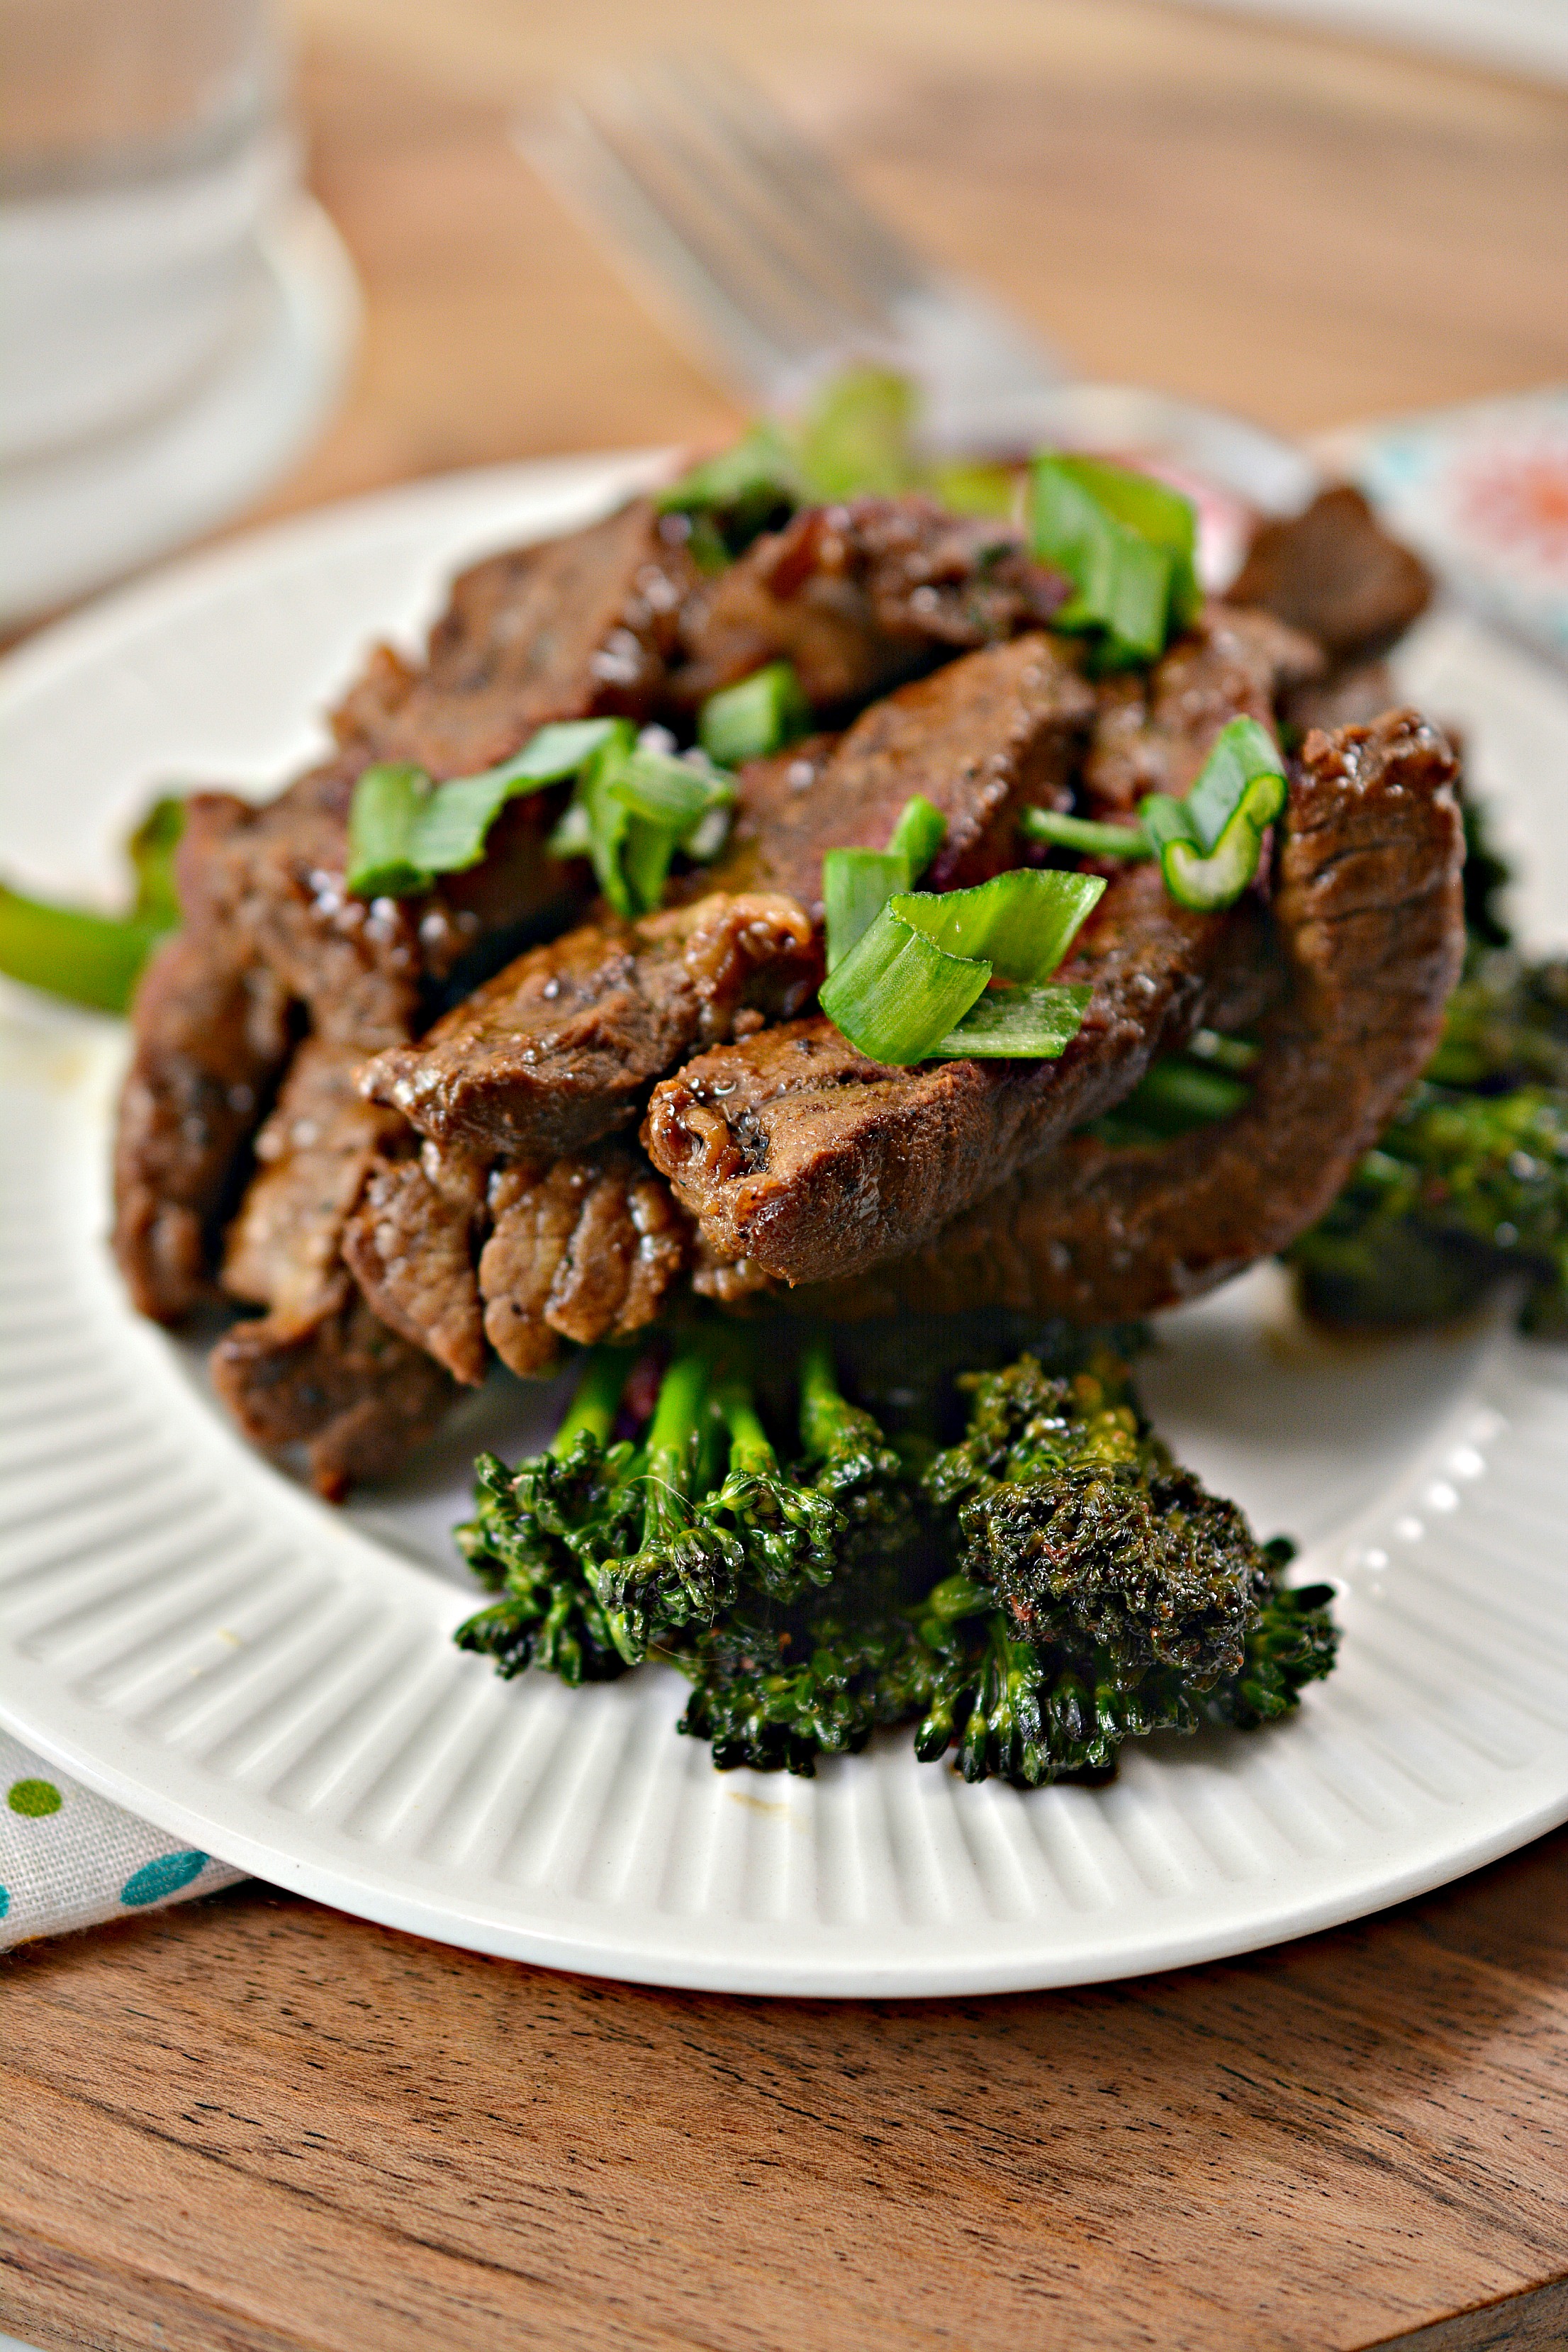 Do you love beef and broccoli? Trying to stay on a low carb keto diet? Use this recipe for Keto Beef and Broccoli to have the food you crave and still stay on the Keto lifestyle. It's a delicious and easy Asian inspired stir-fry that will keep you feeling full and on track with your diet.